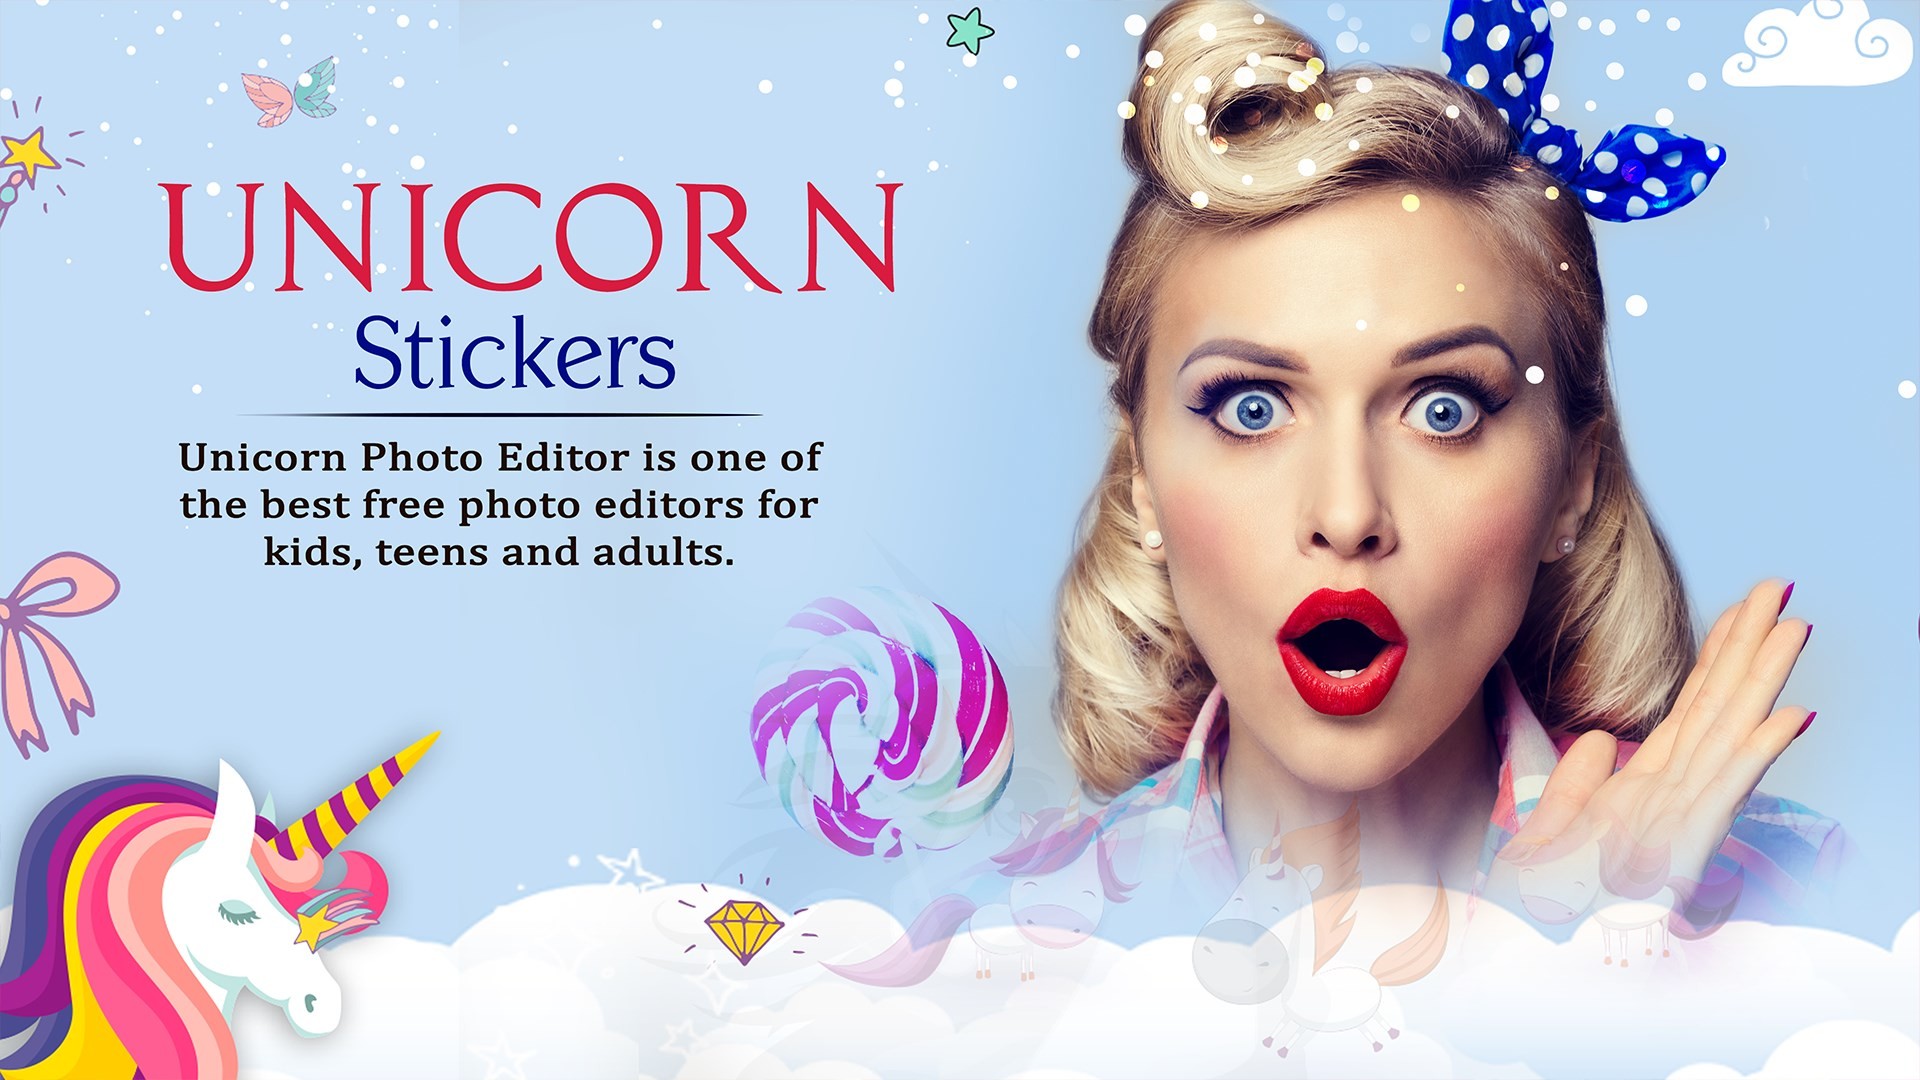 Unicorn Photo Stickers Cute Photo Editor For Girls - Vintage Girl With Lollipop - HD Wallpaper 